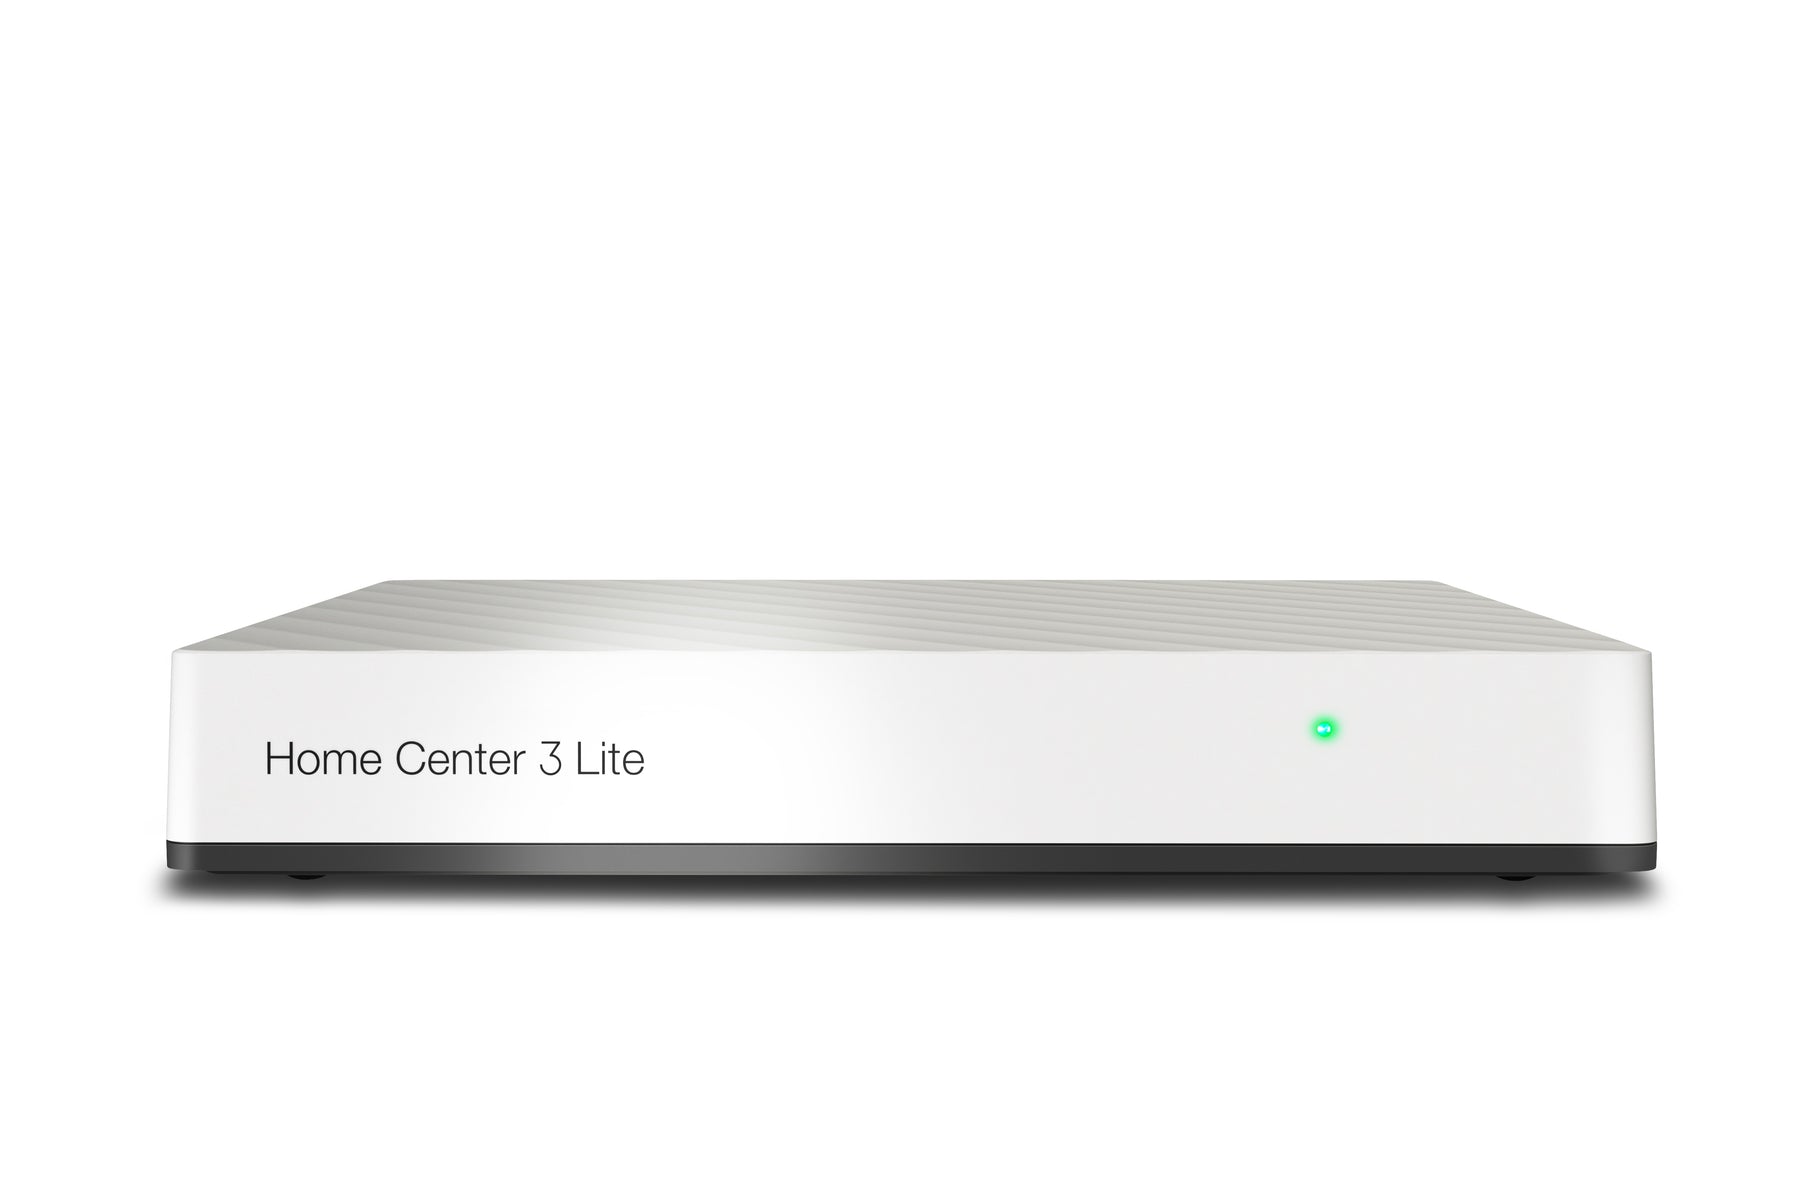 Fibaro Smart Home Central Controller, specifically for UK buildings, front view.